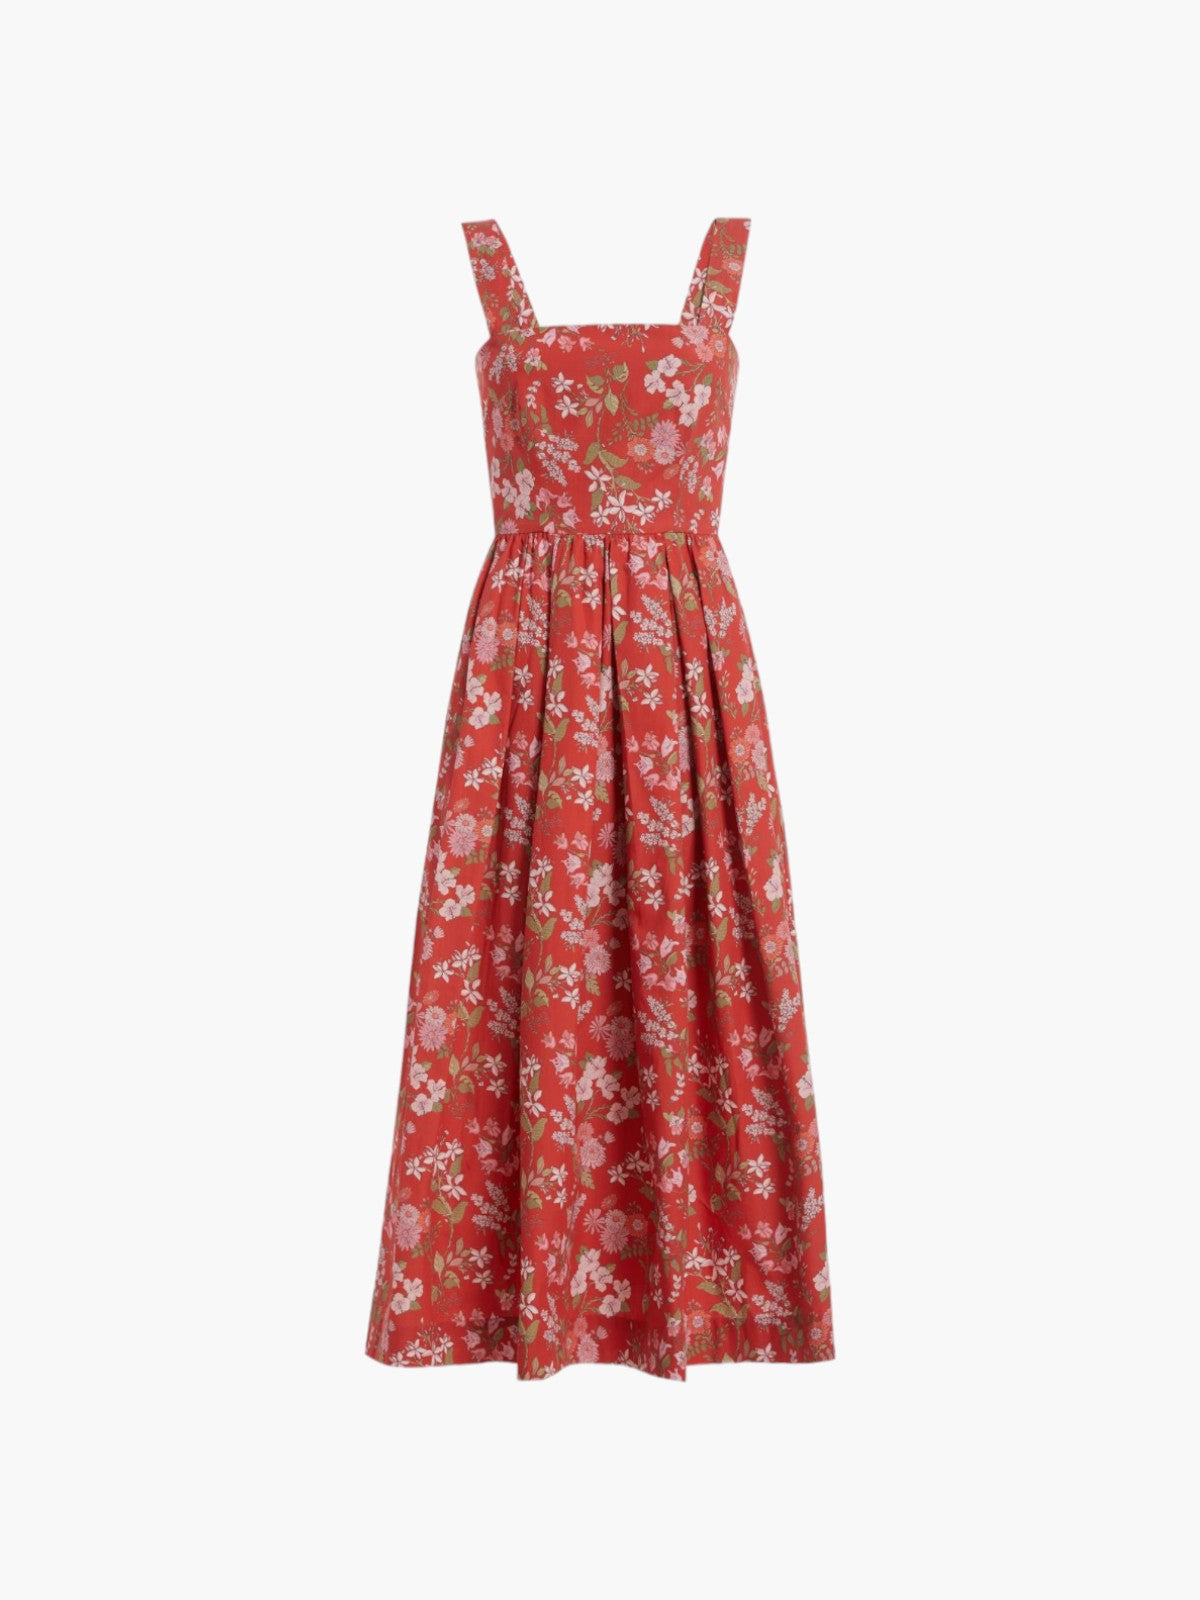 Poof Dress | Red with Pink Floral